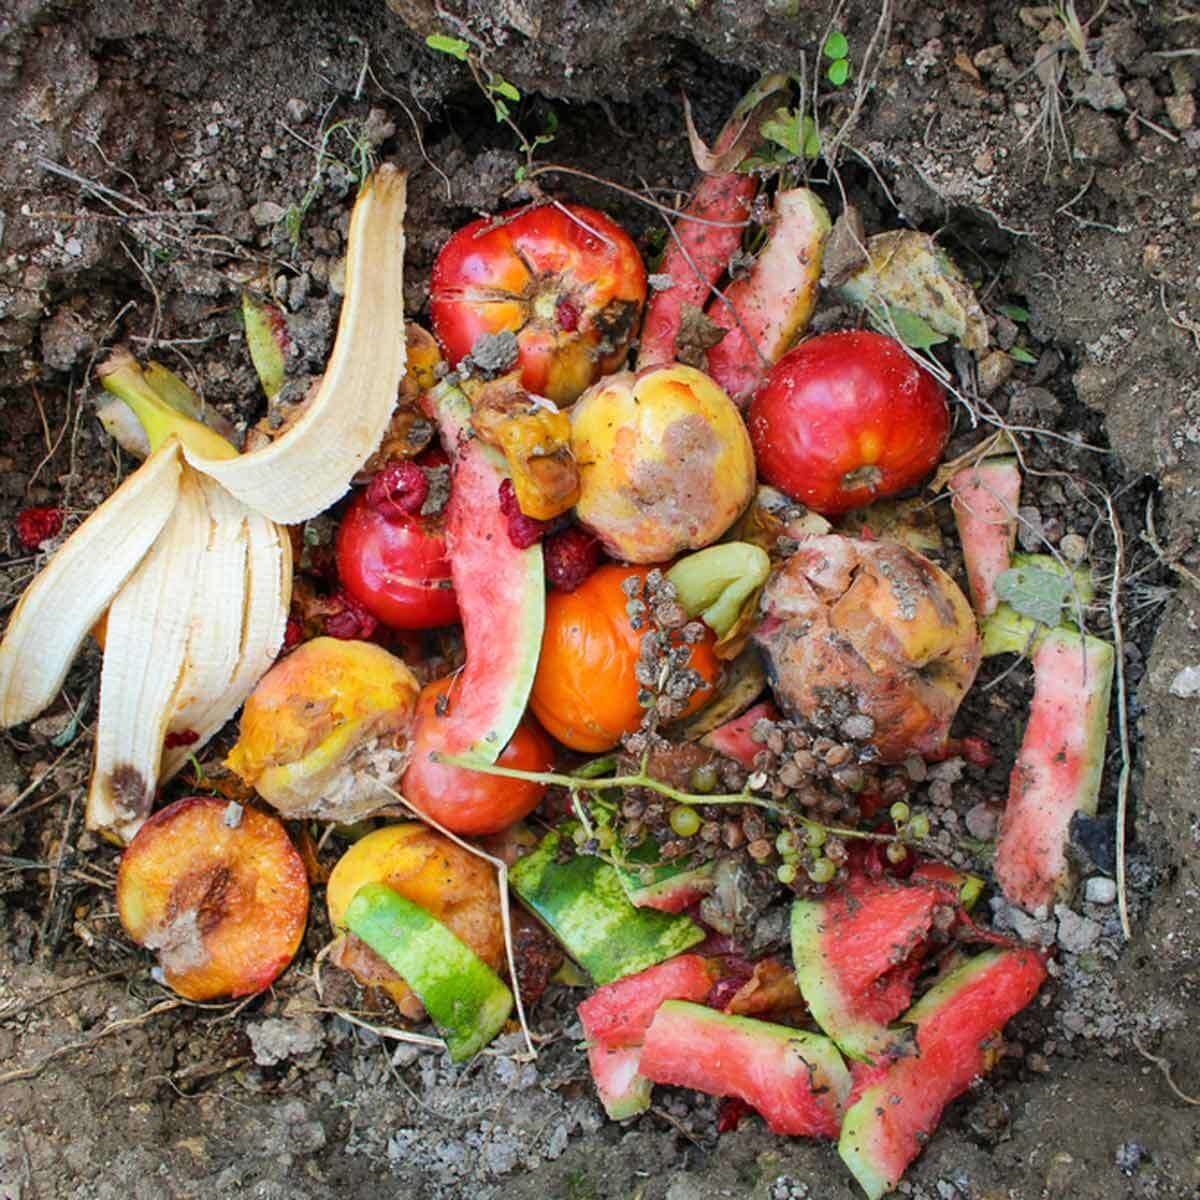 12 Tips for Successful Spring Composting — The Family Handyman